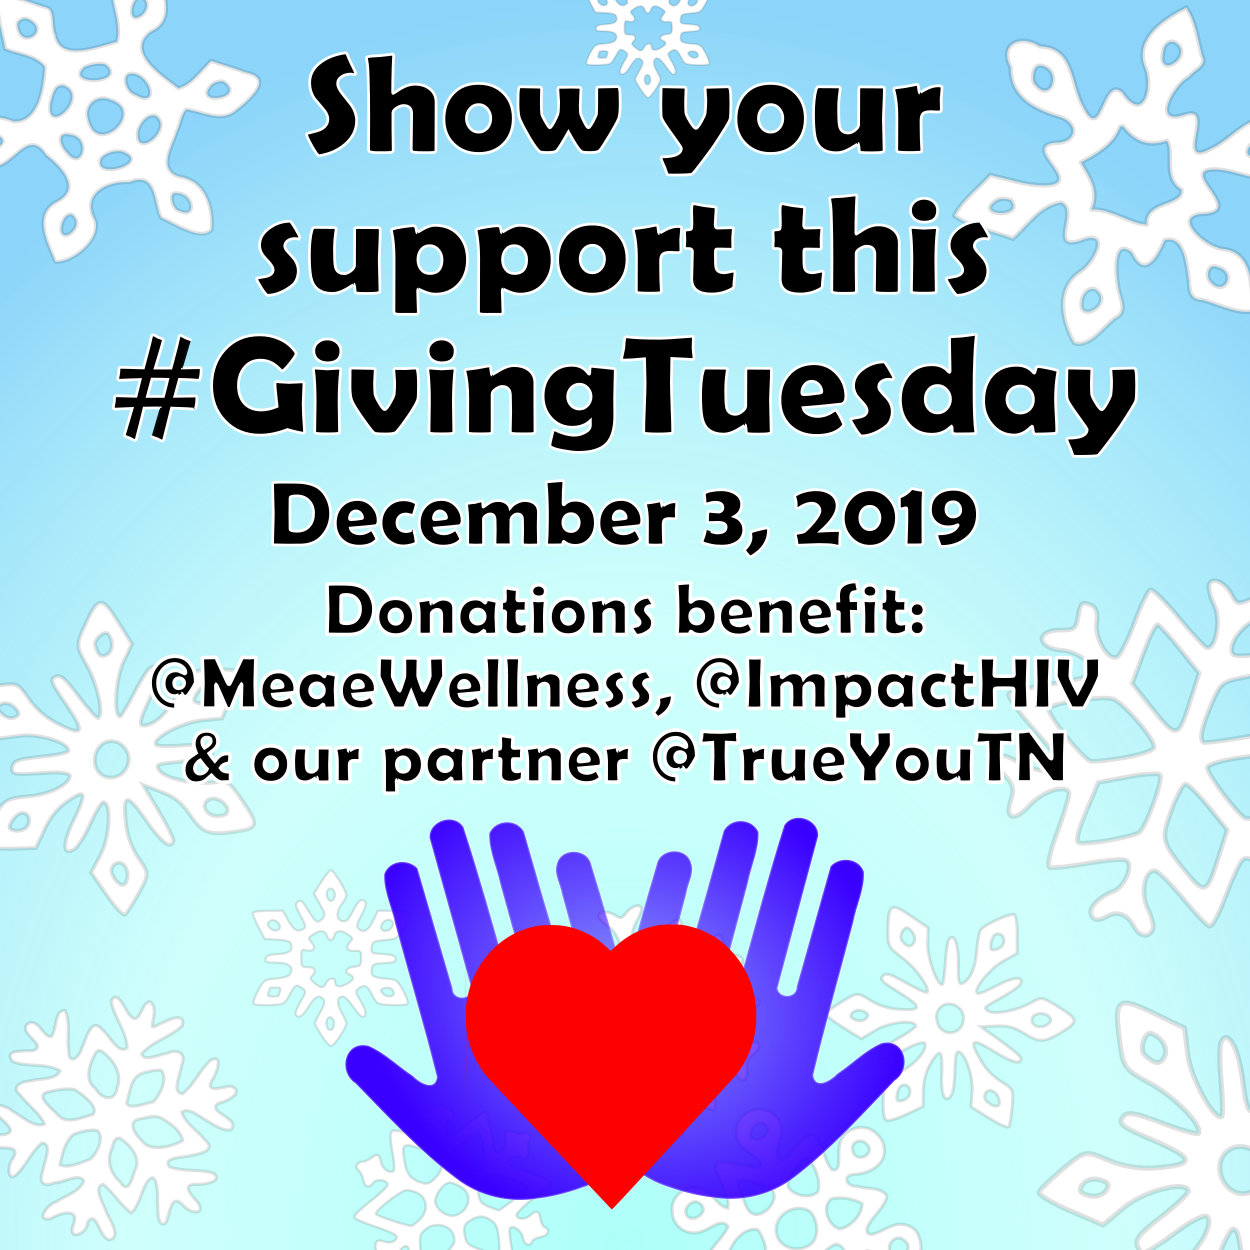 Show your support this #GivingTuesday. Donations support @MeaeWellness, @ImpactHIV, and our partner @TrueYouTN